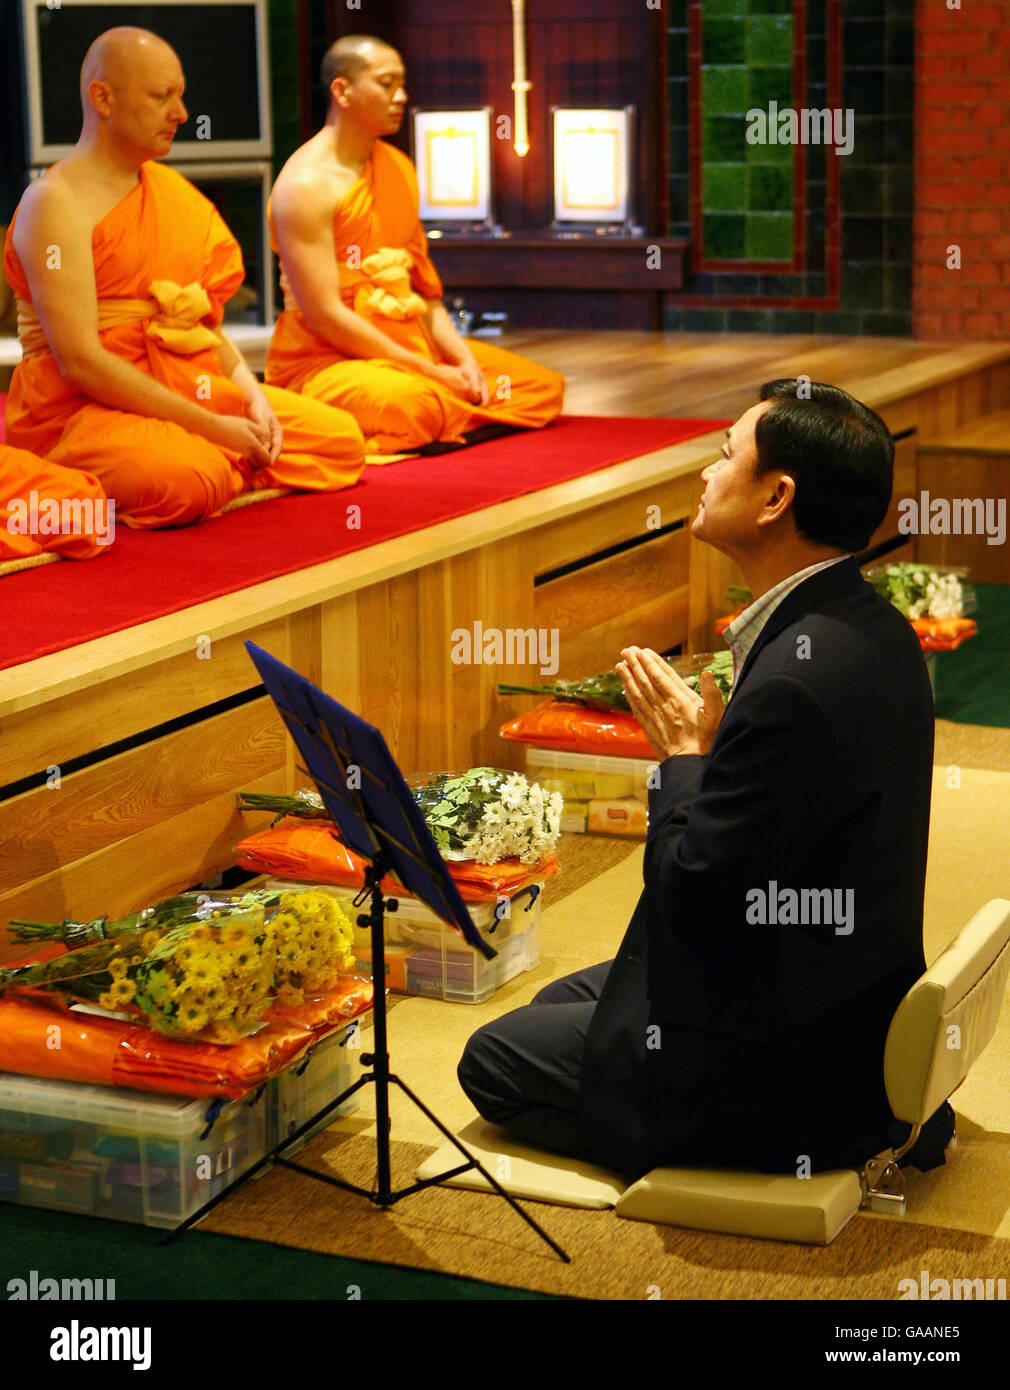 Dr. Thaksin Shinawatra, former Prime Minister of Thailand, prays with monks at the Dhammakaya Centre for Buddist Meditation in Knaphill, Surrey, a year after being ousted from office. Stock Photo